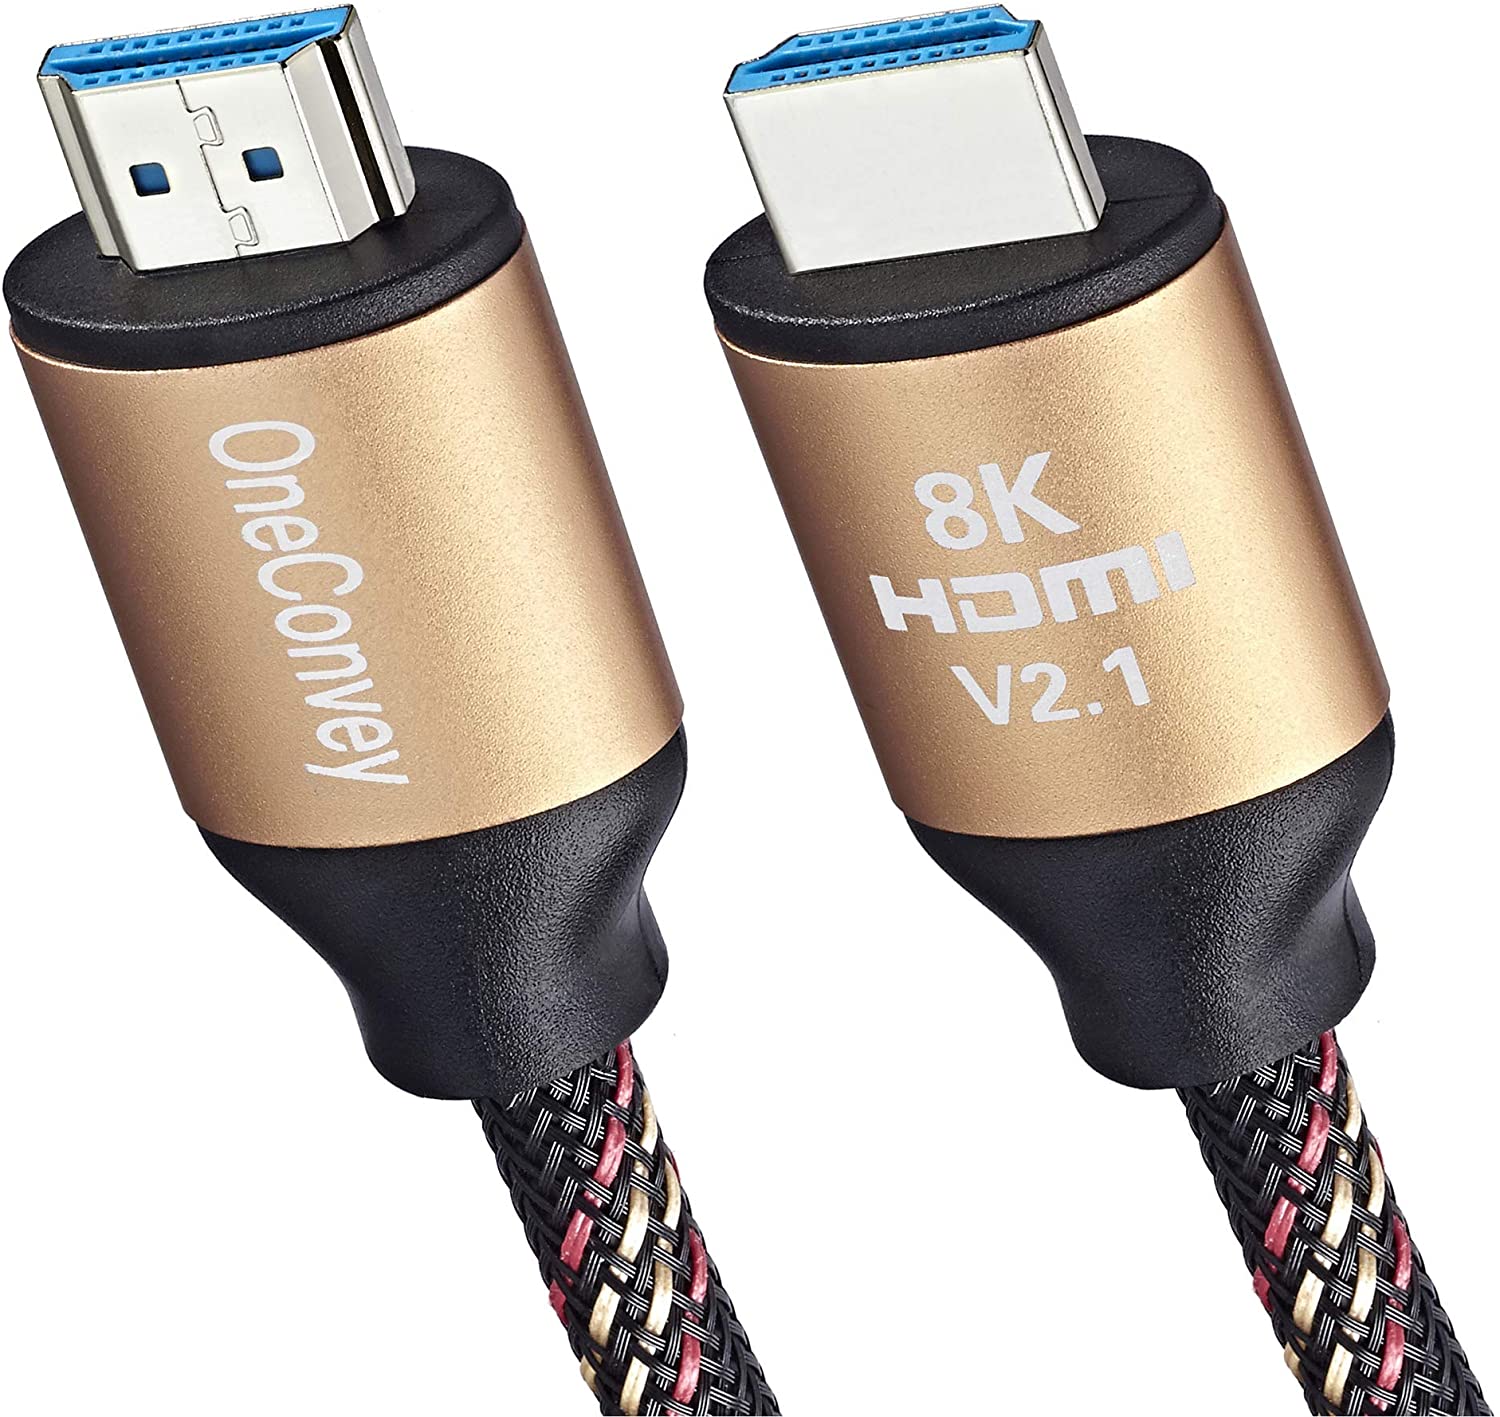 8K HDMI Cable by OneConvey